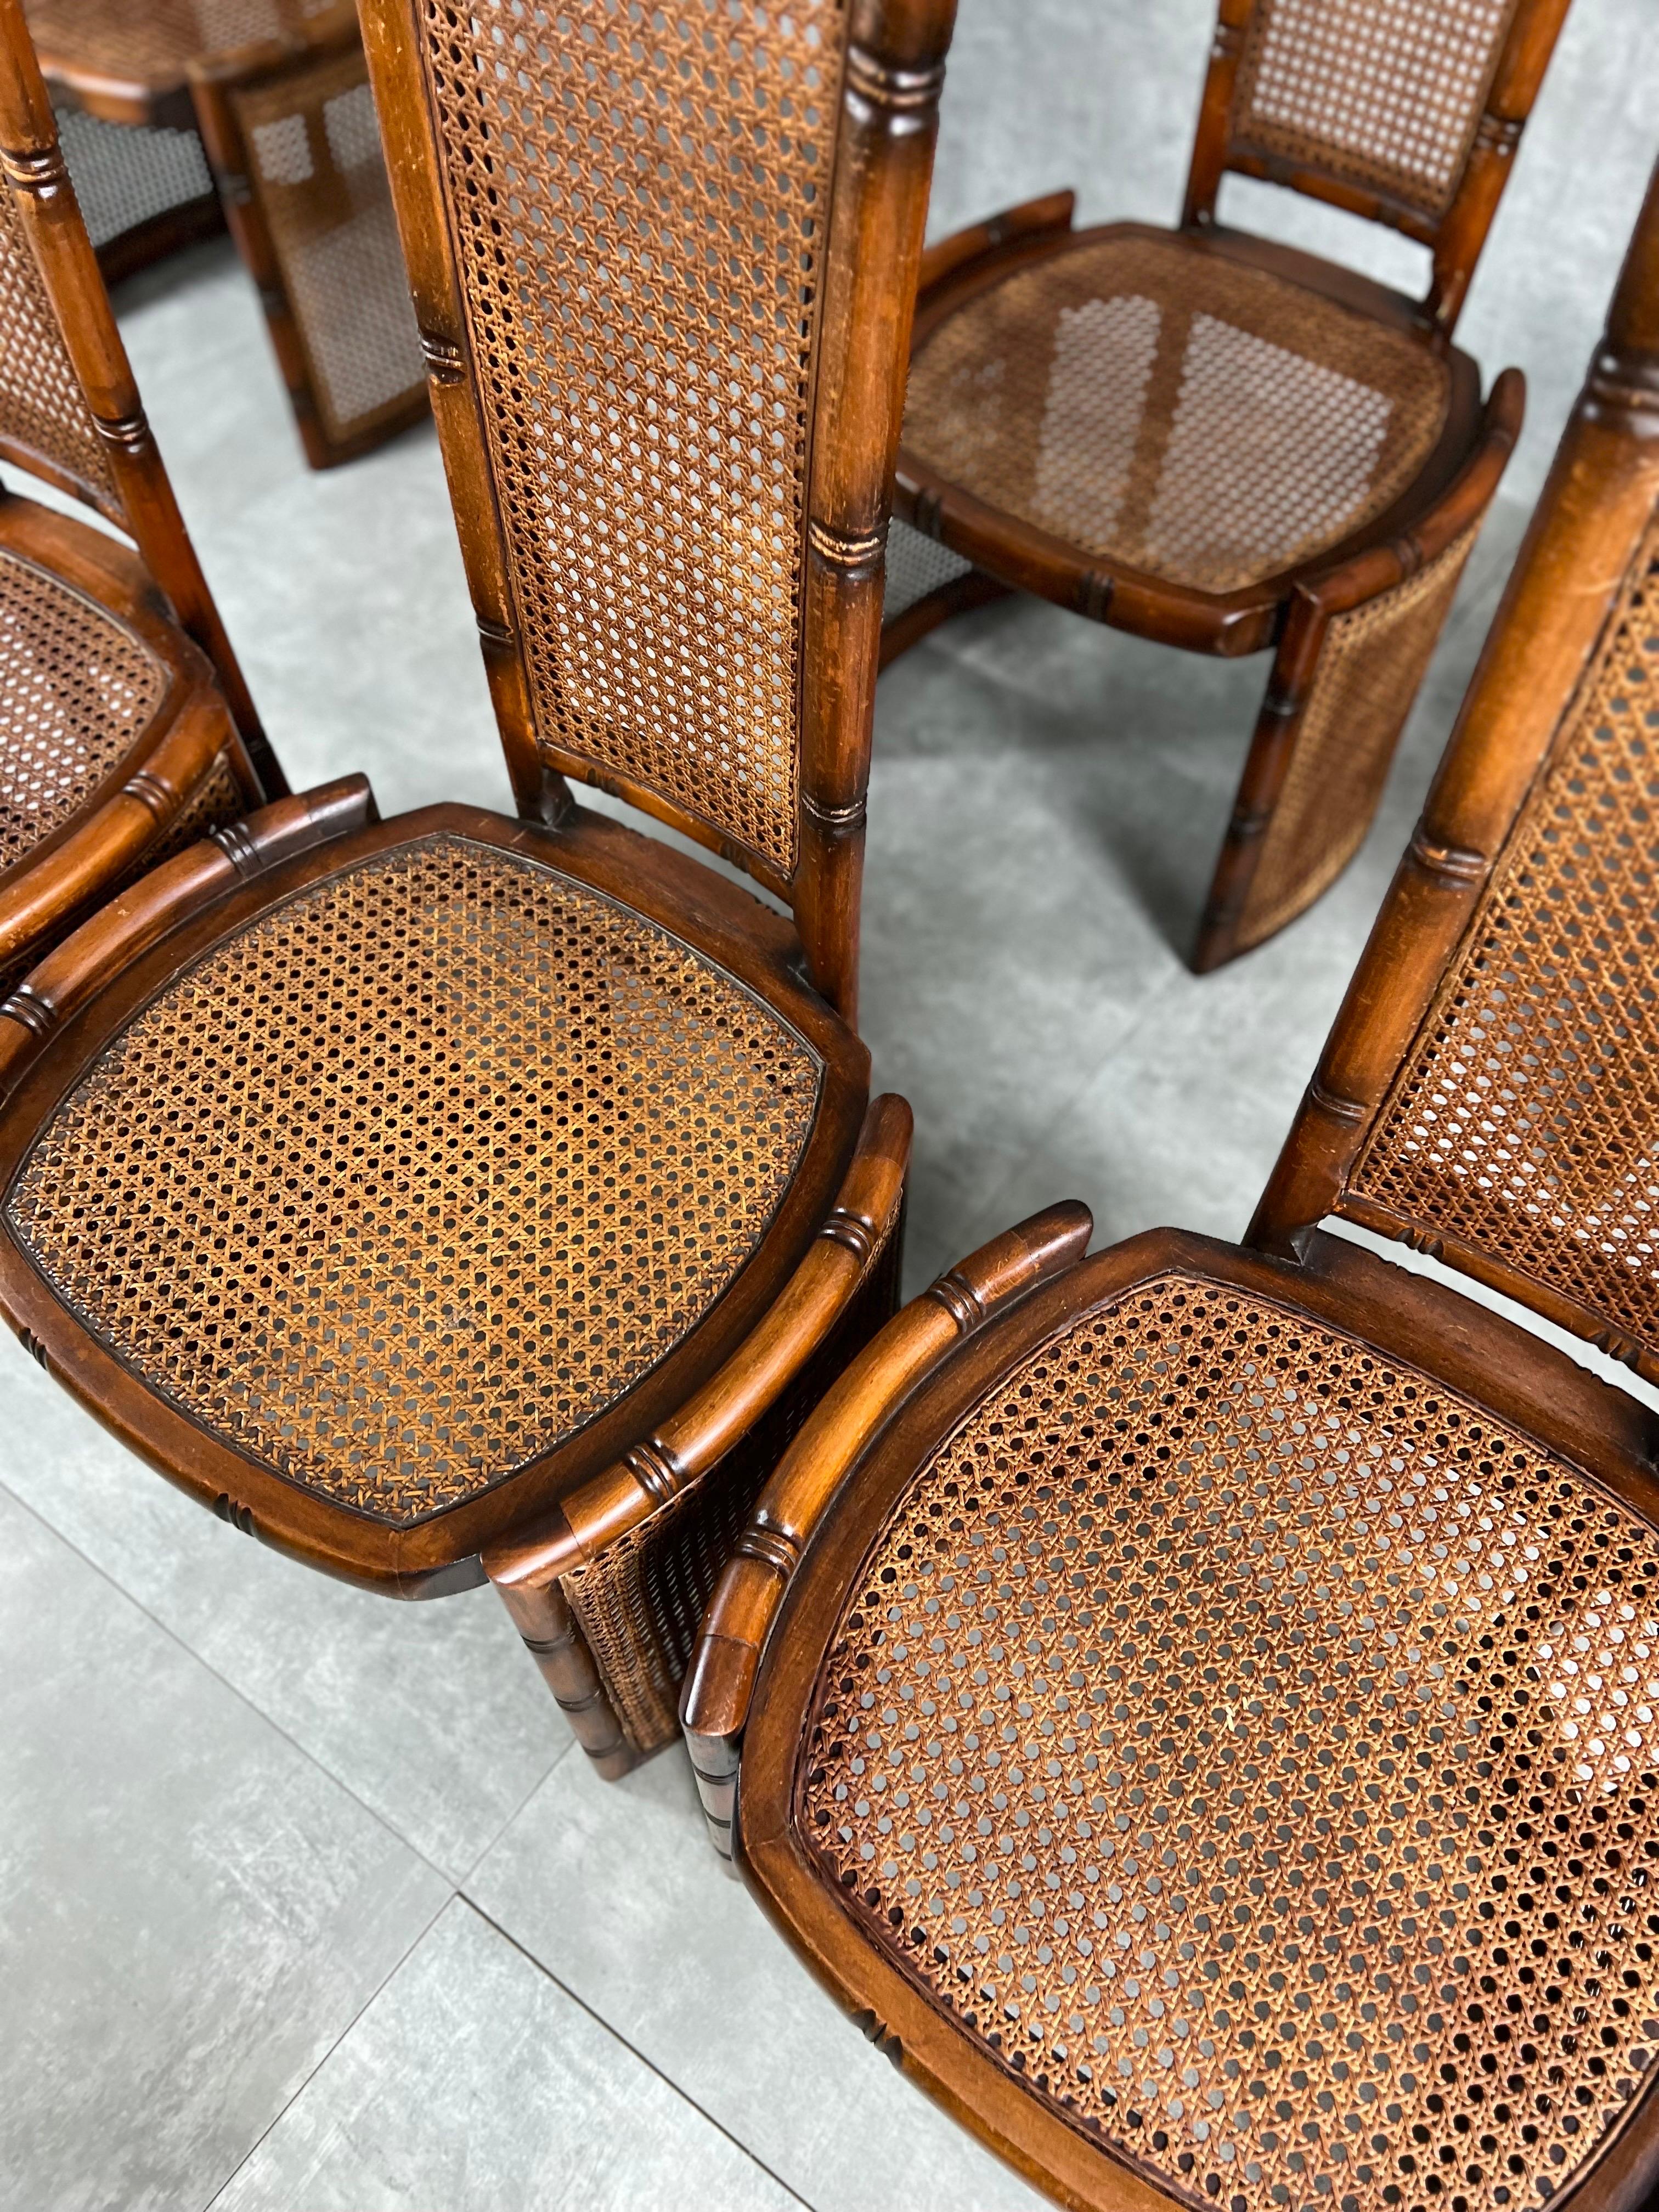 Set of 6 chairs with wooden structure high back chairs with Vienna straw. Designed by Marzio Cecchi for Studio Most, Italy, 1970s.